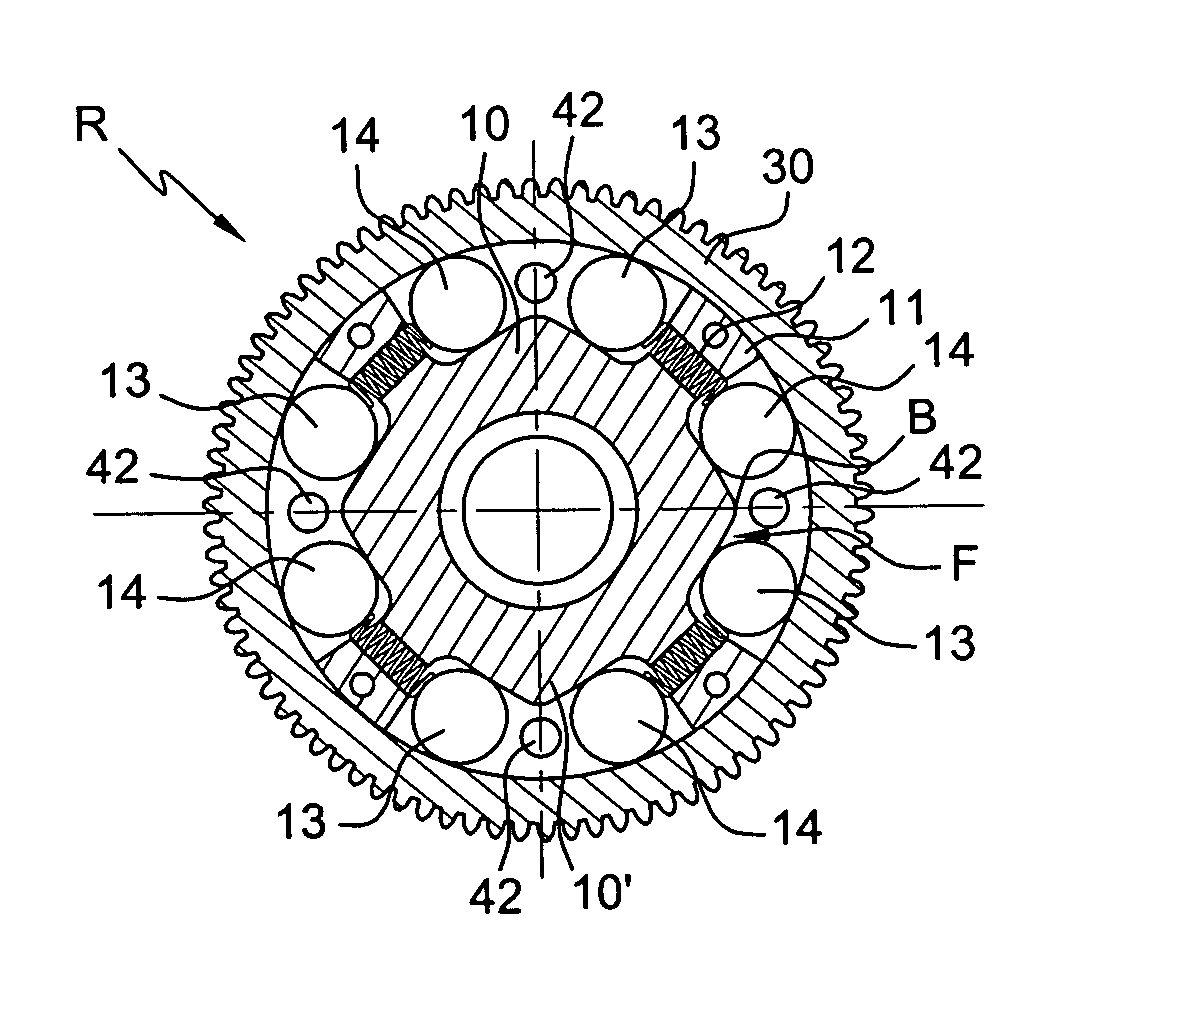 Torque limiter having two mechanical inlets